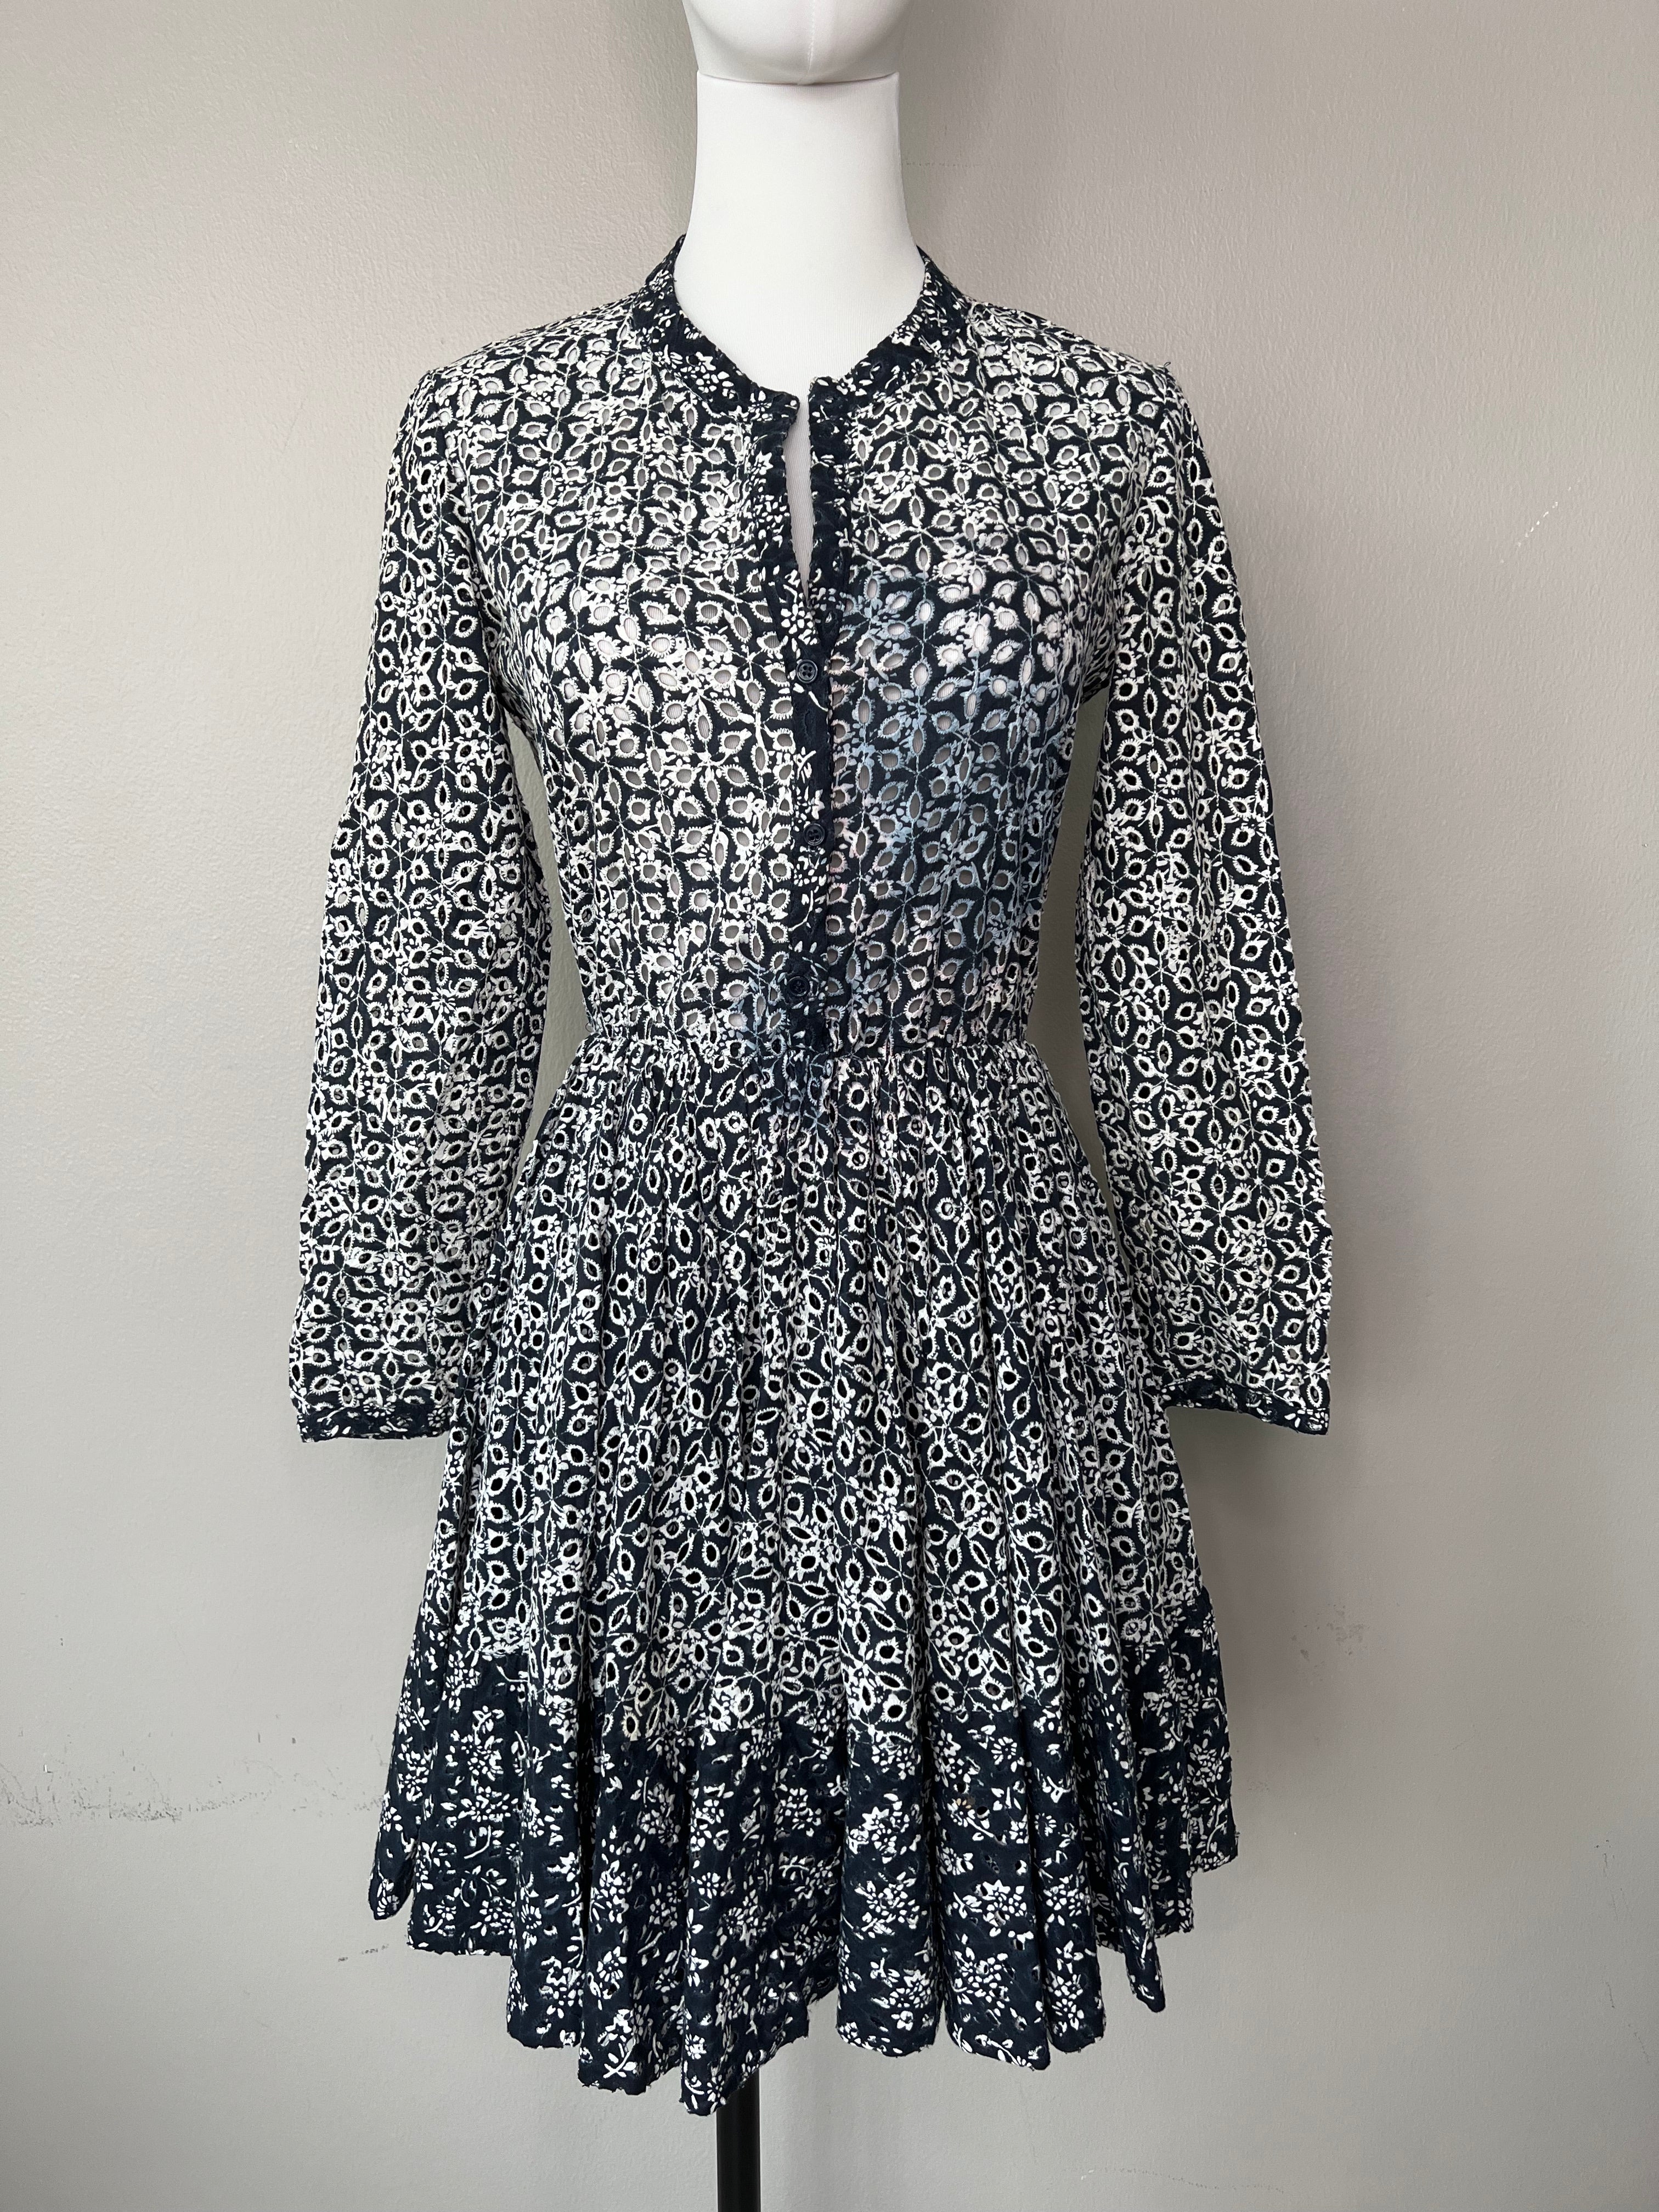 Navy blue A line dress with white floral designs - MAJE